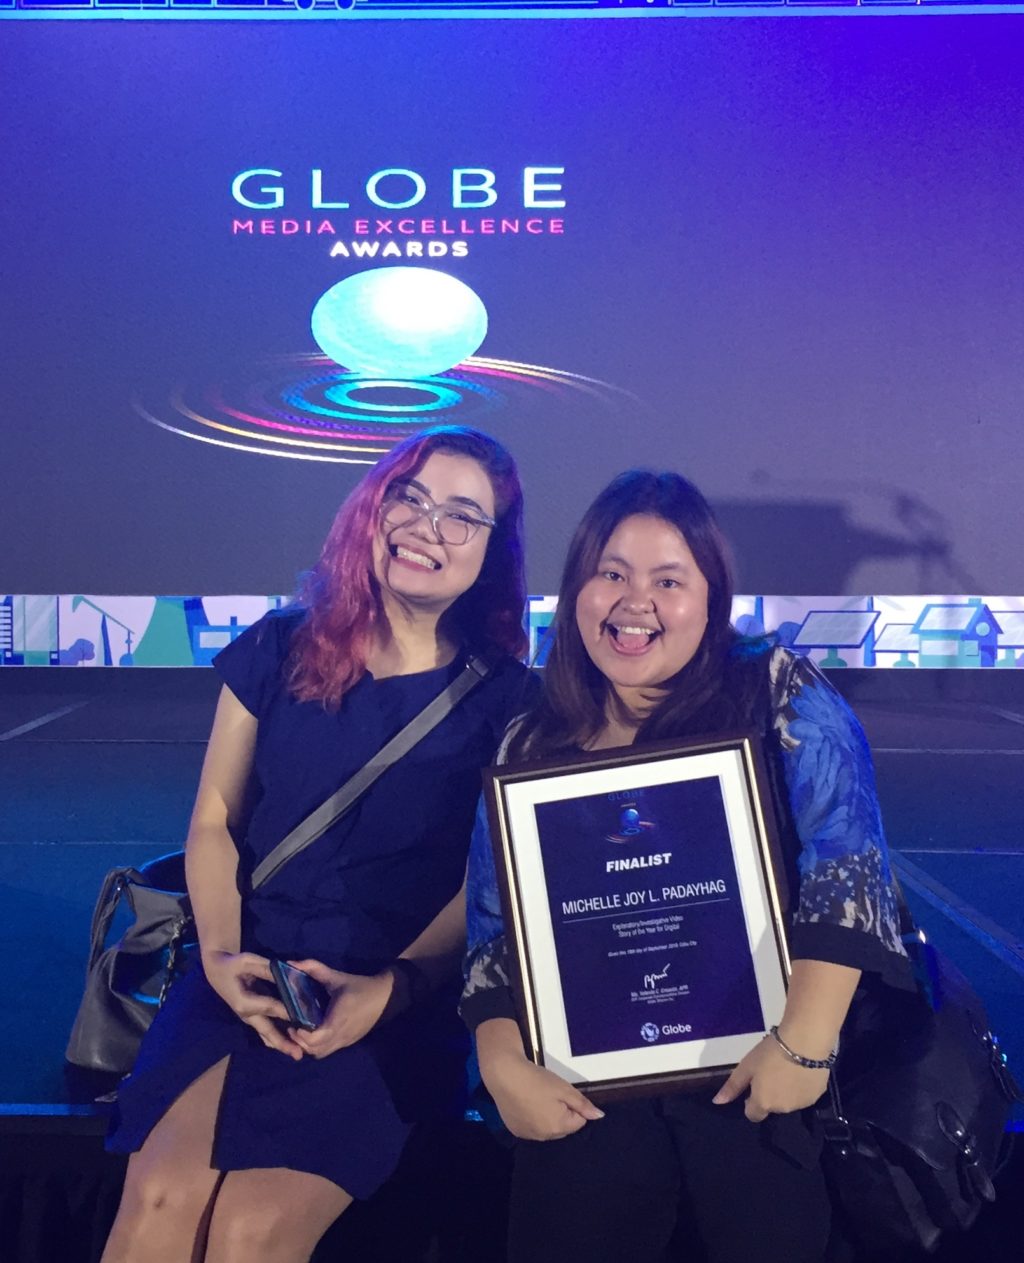 Michelle Joy Padayhag and Korinna Lucero's video documentary on a blind fisherman in Argao was nominated in the Explanatory/Investigative Video Documentary category of the Globe Media Excellence Award (GMEA).